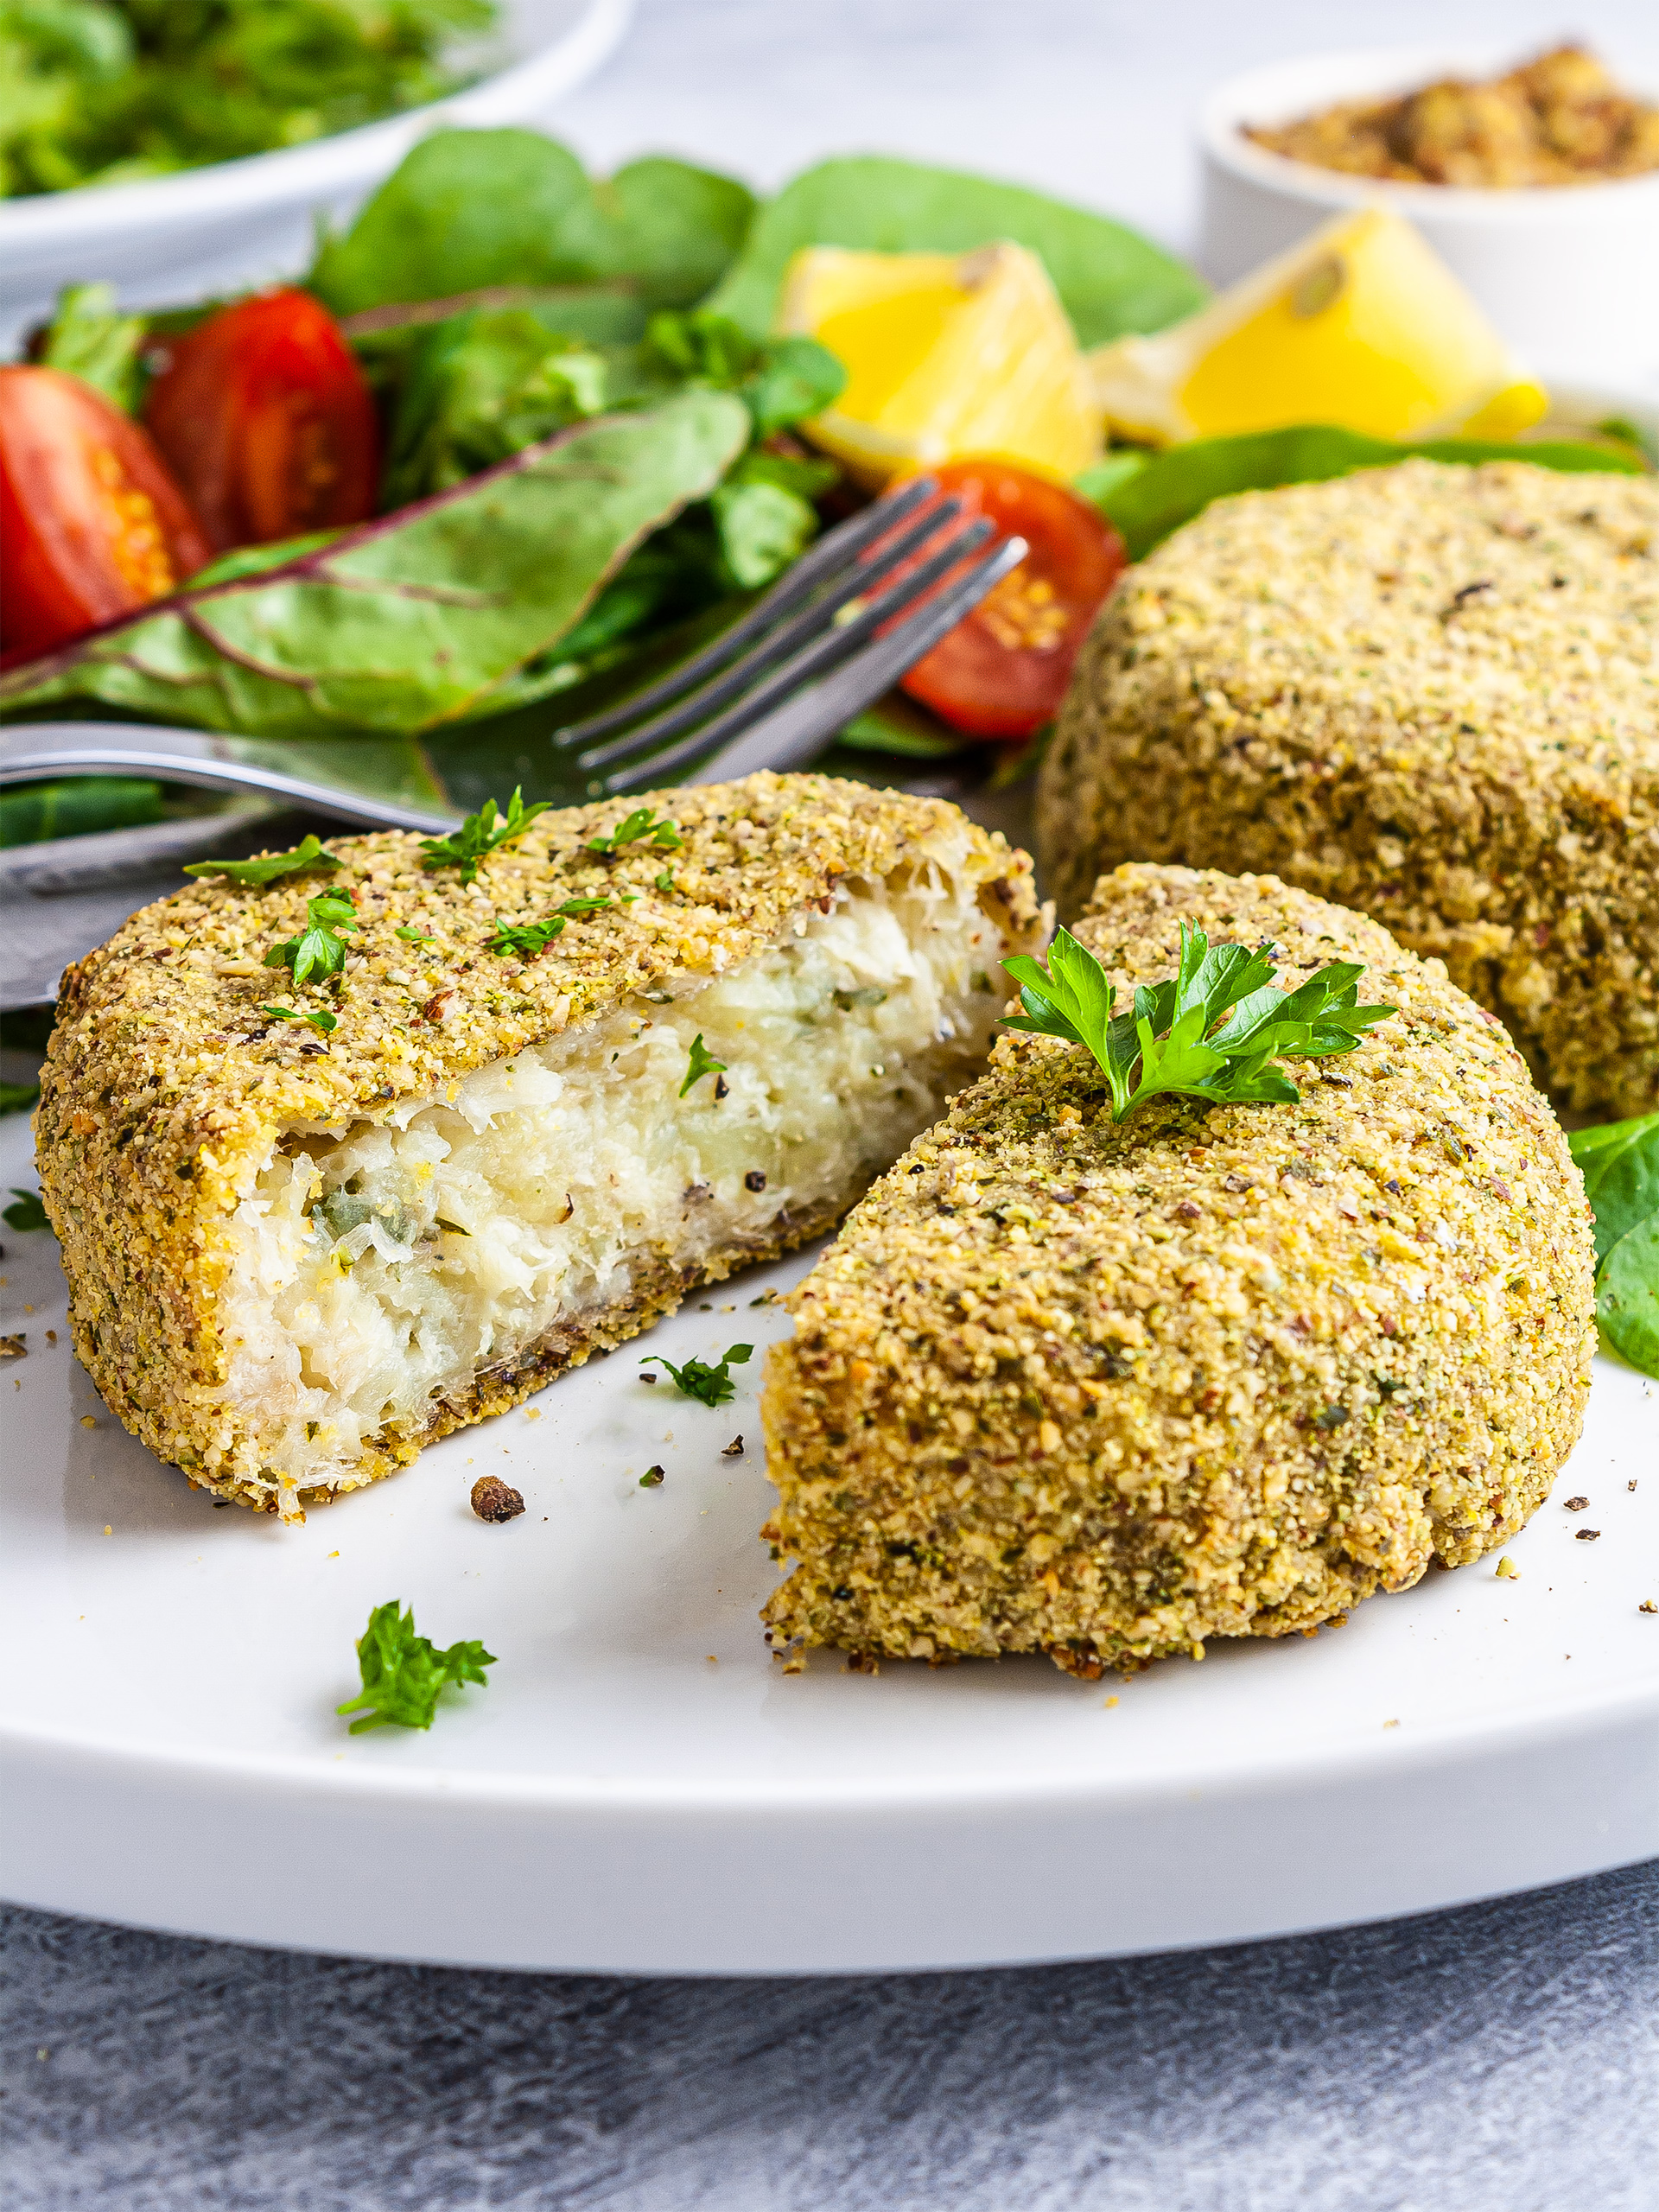 Gluten-Free Oven-Baked Fish Cakes Recipe